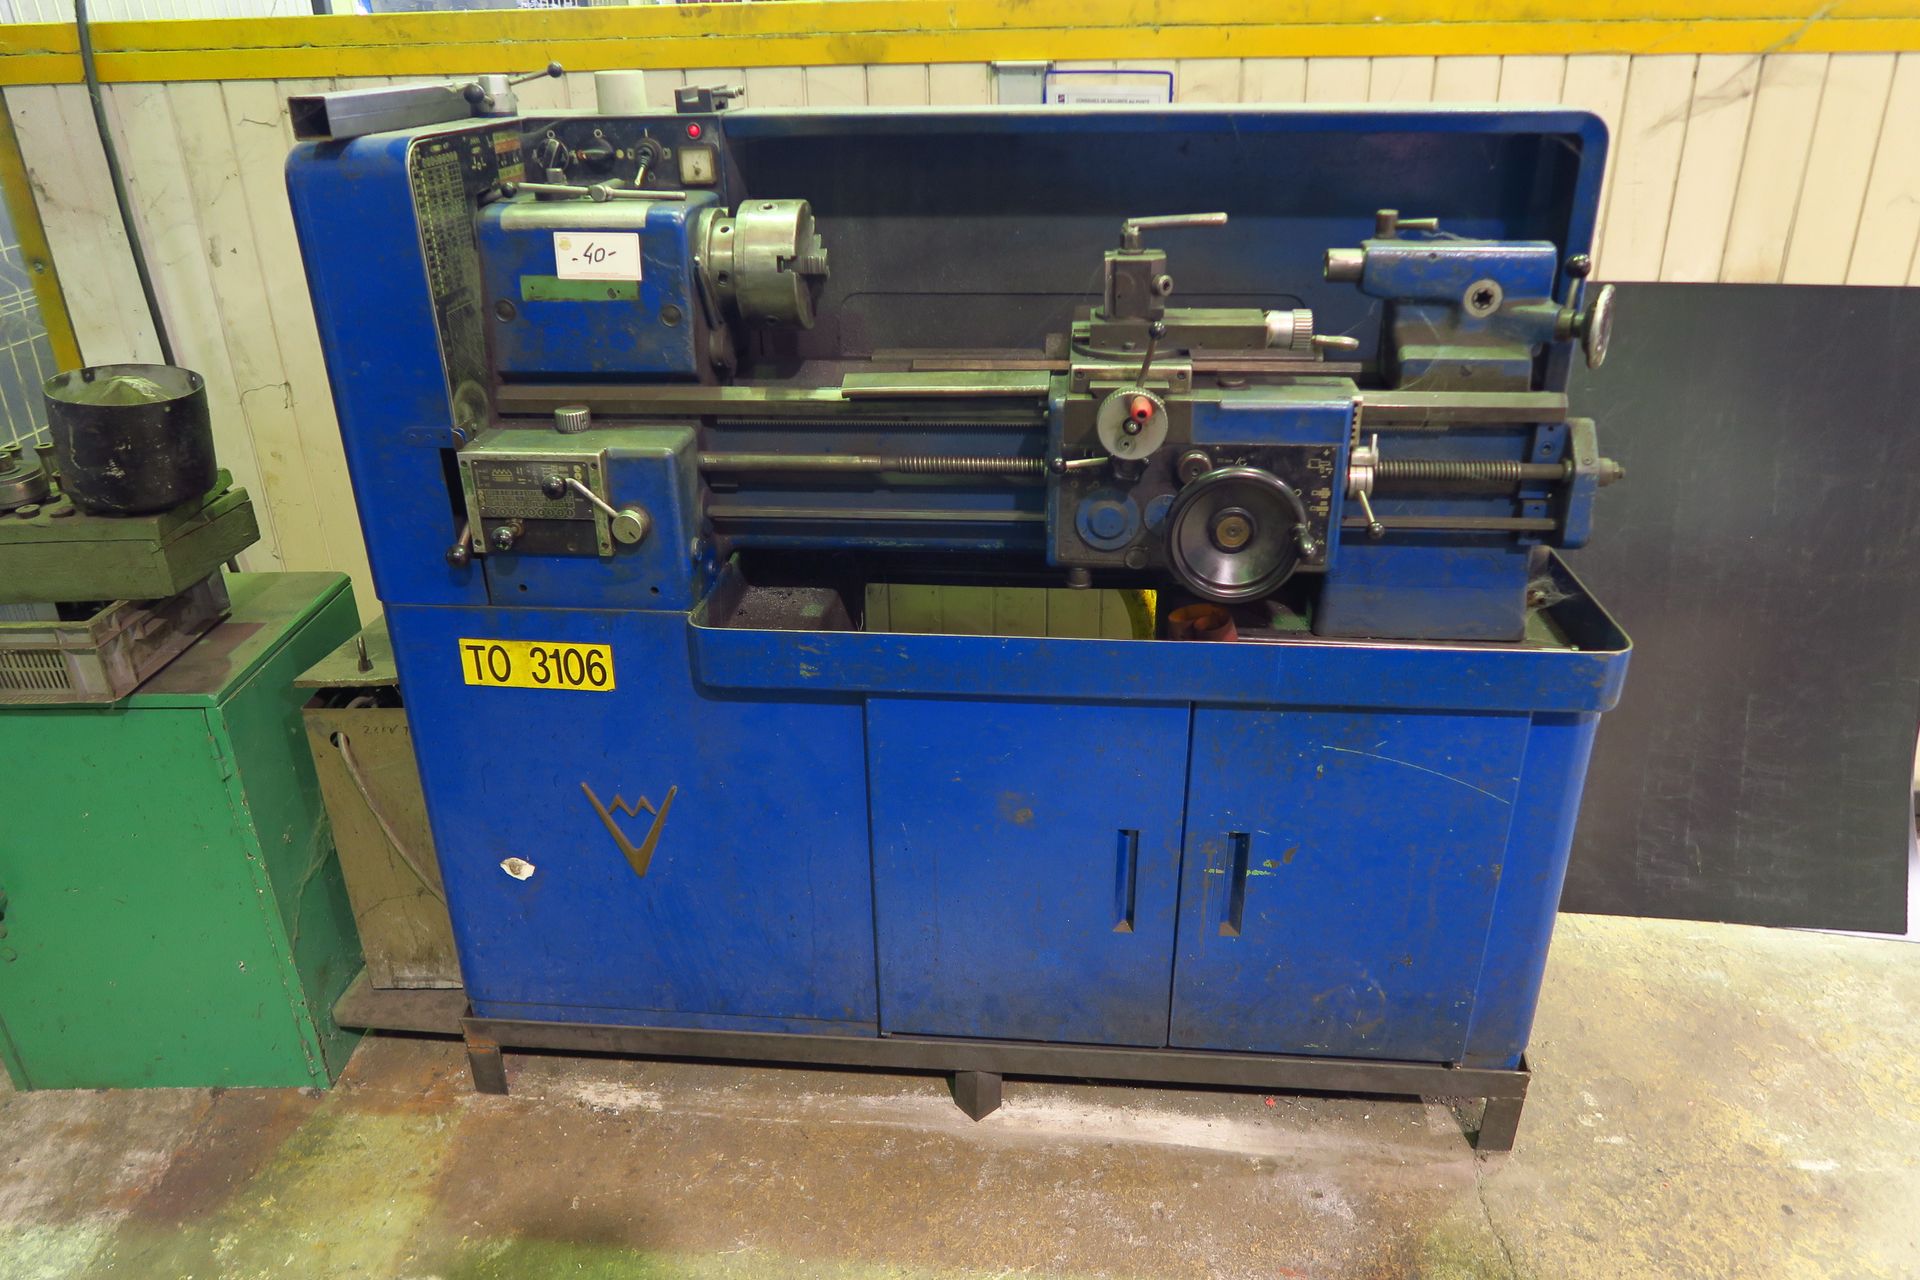 Null DEVALIERE lathe (TO3106) Type H-140-E, Year 24/07/69, N°s 8488, EP 600 mm, &hellip;